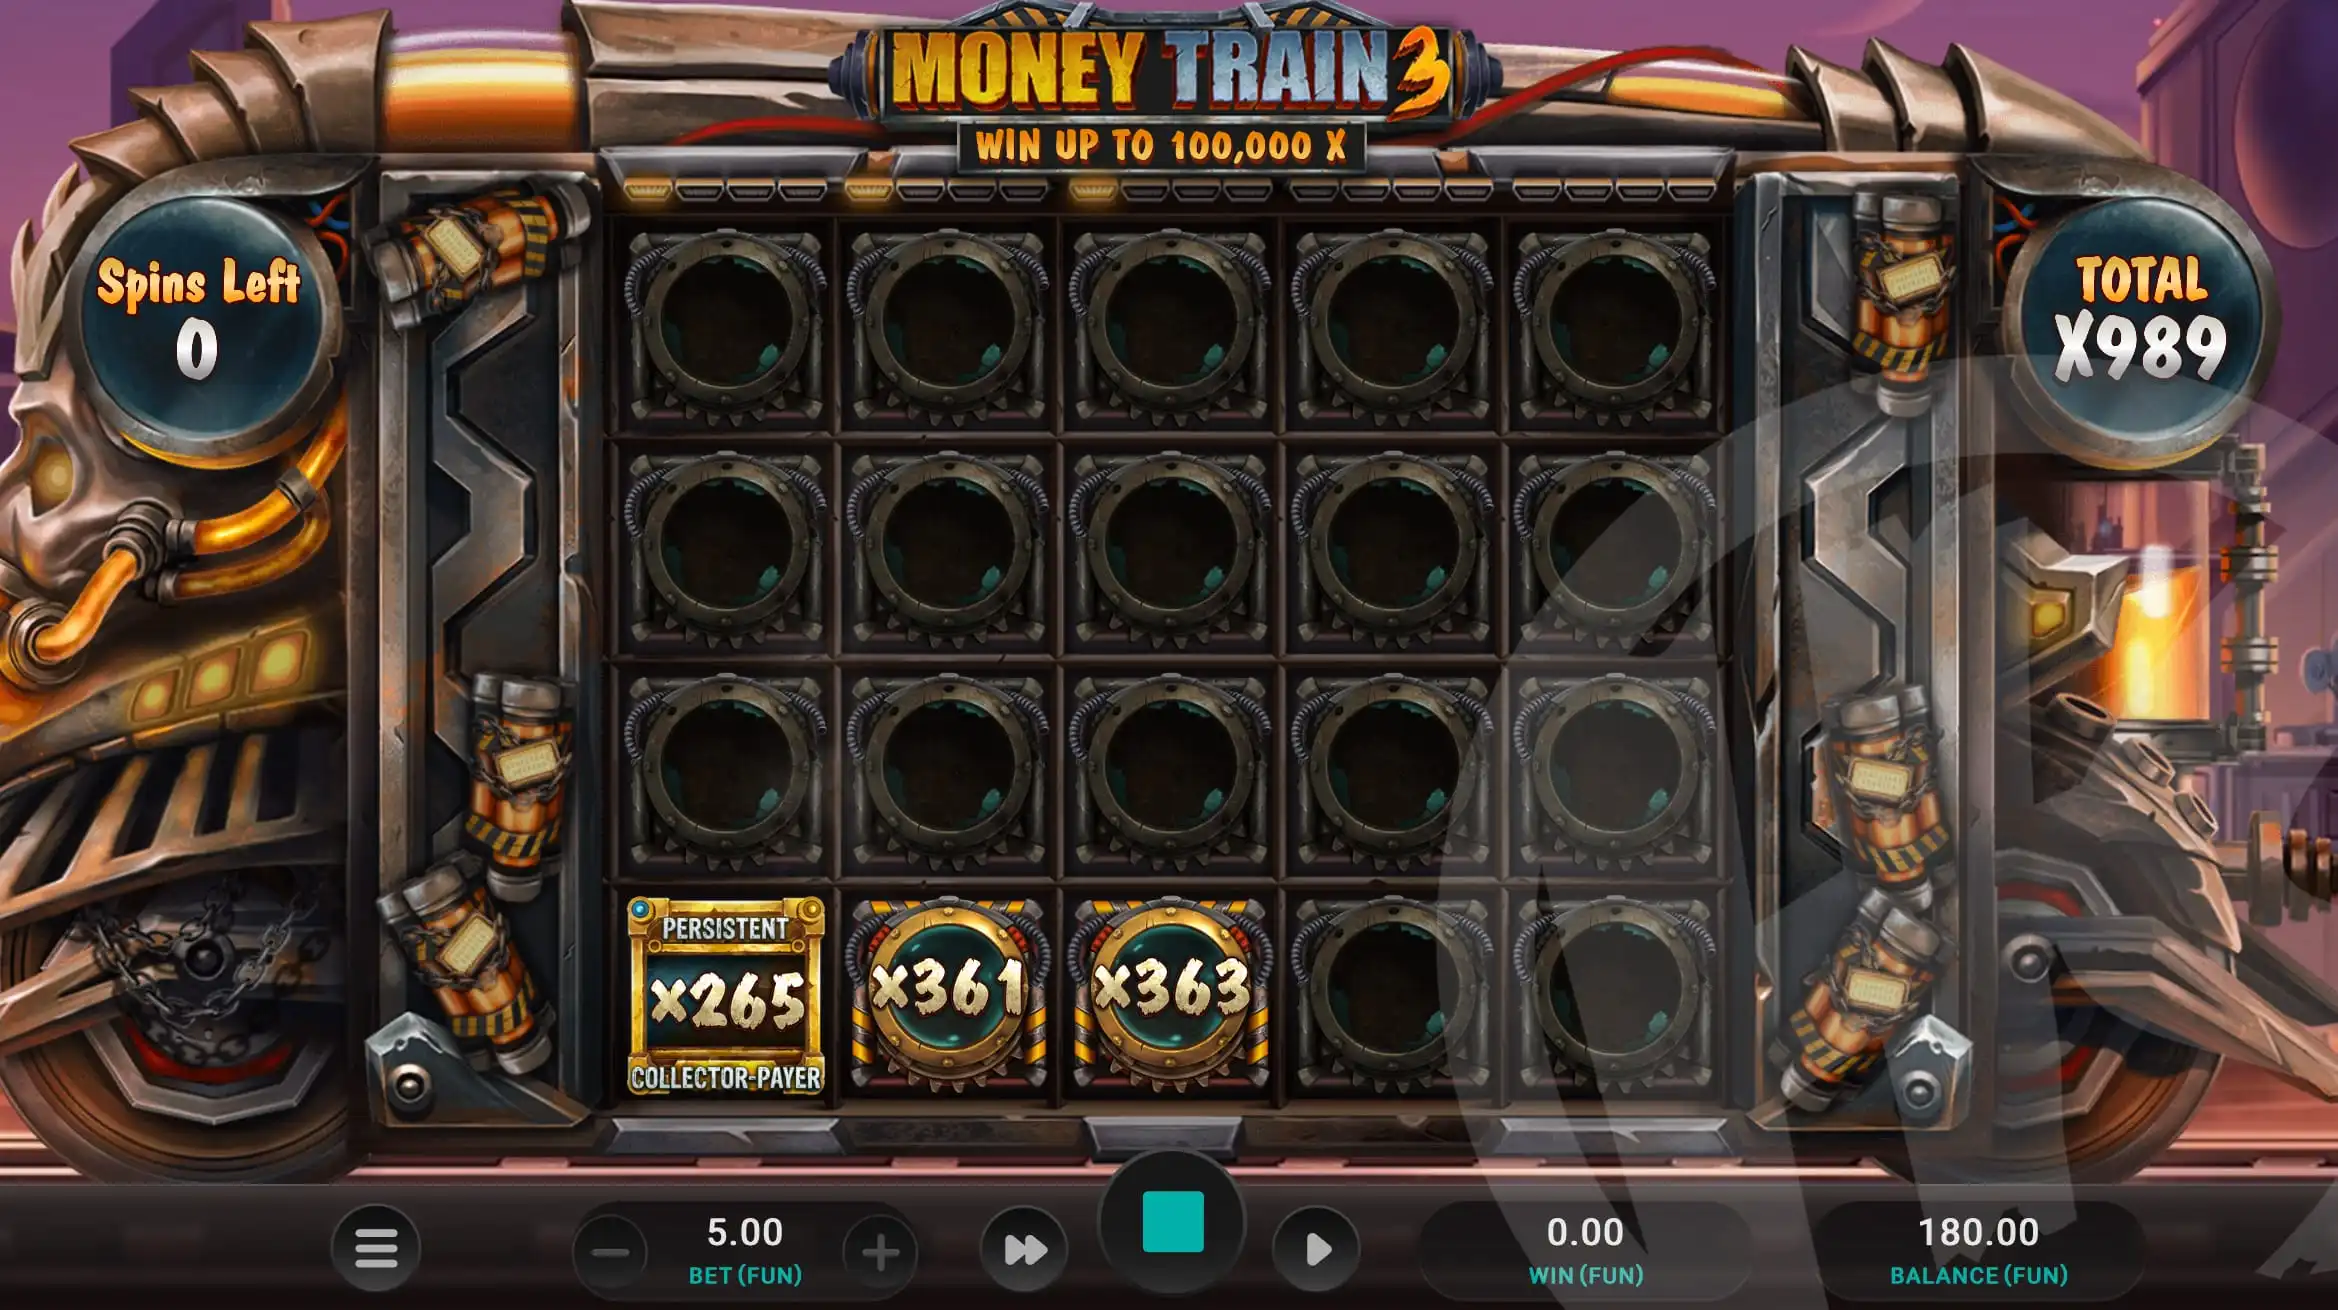 Money Train 3 Persistent Collector-Payer